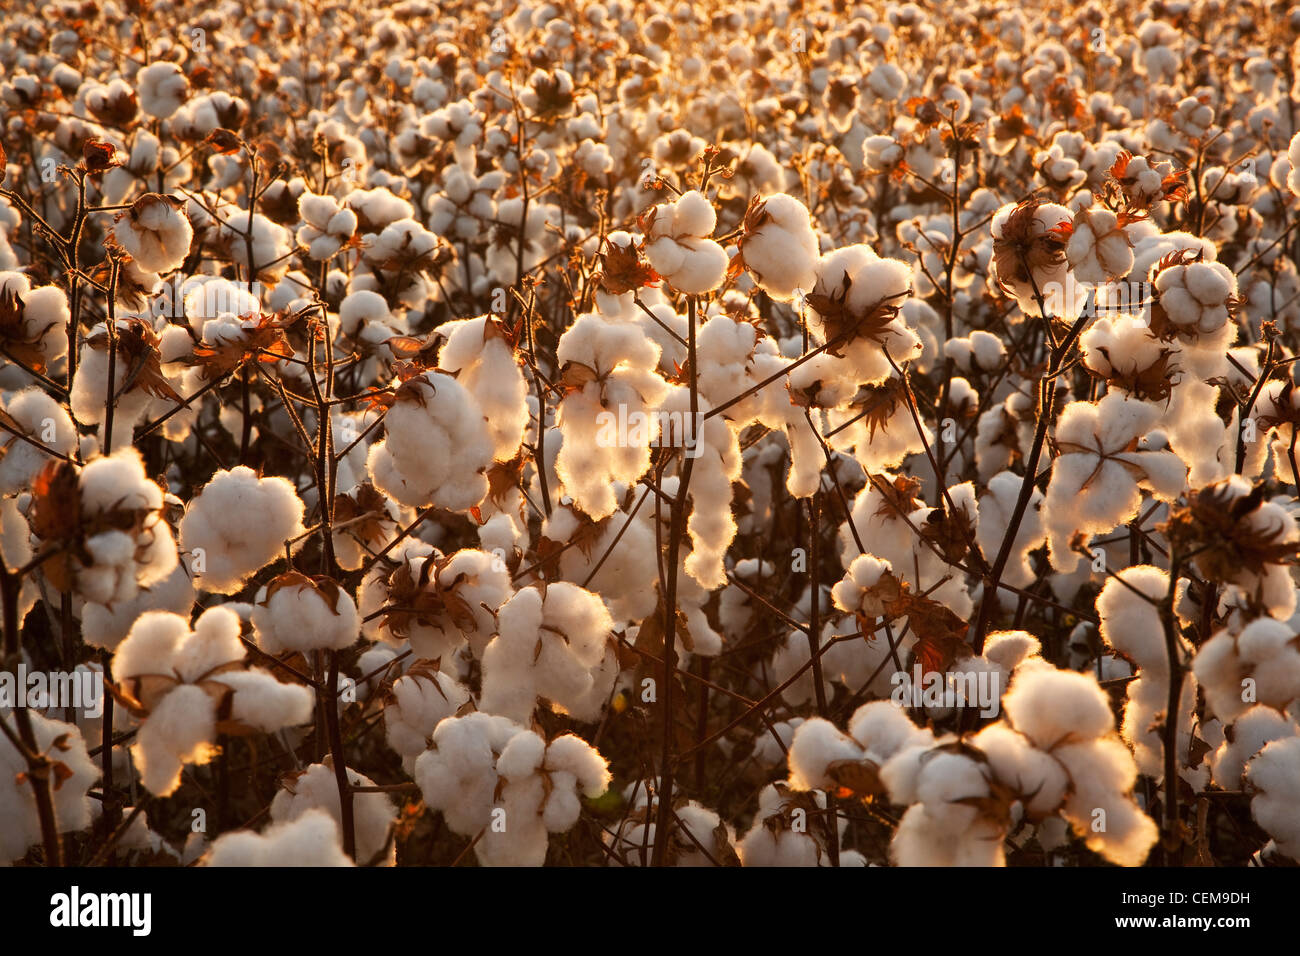 Agriculture - Mature high-yield open cotton bolls at harvest stage backlit by late afternoon sunlight / Arkansas, USA. Stock Photo